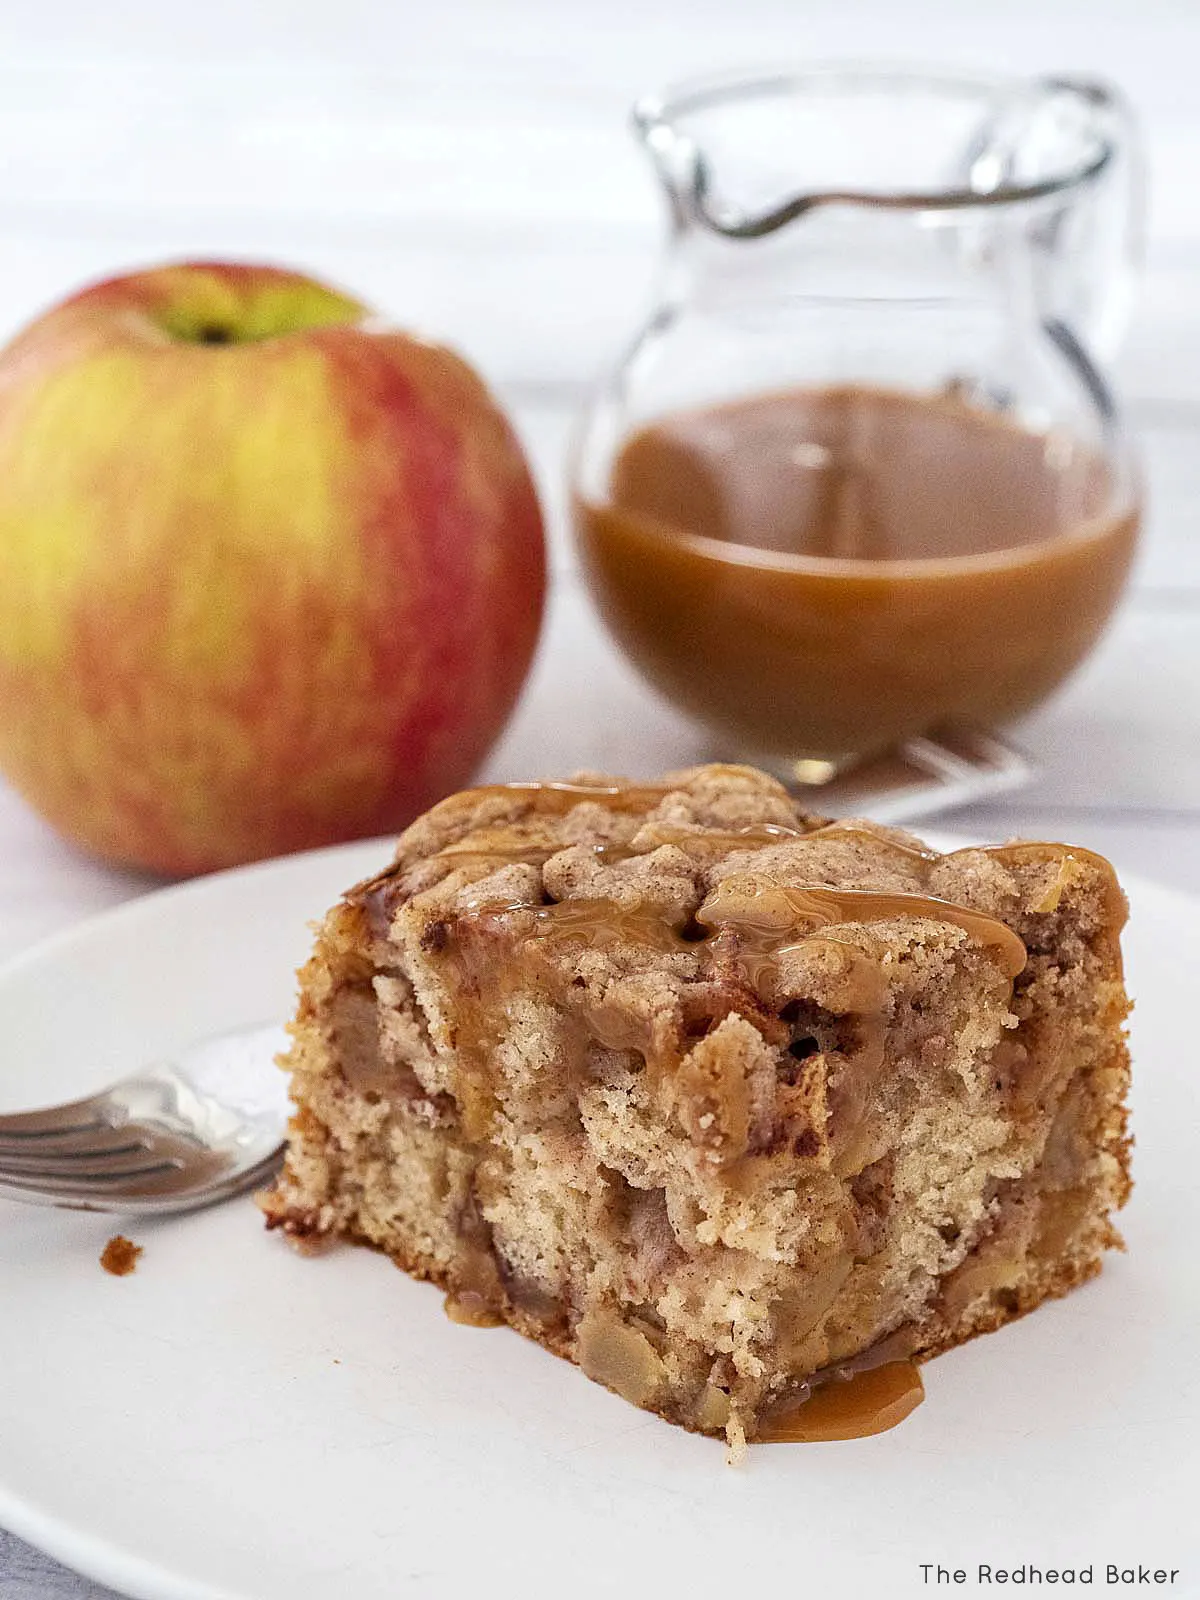 A slice of caramel apple crumb cake on a white plate in front of a jug of caramel sauce and a whole apple.